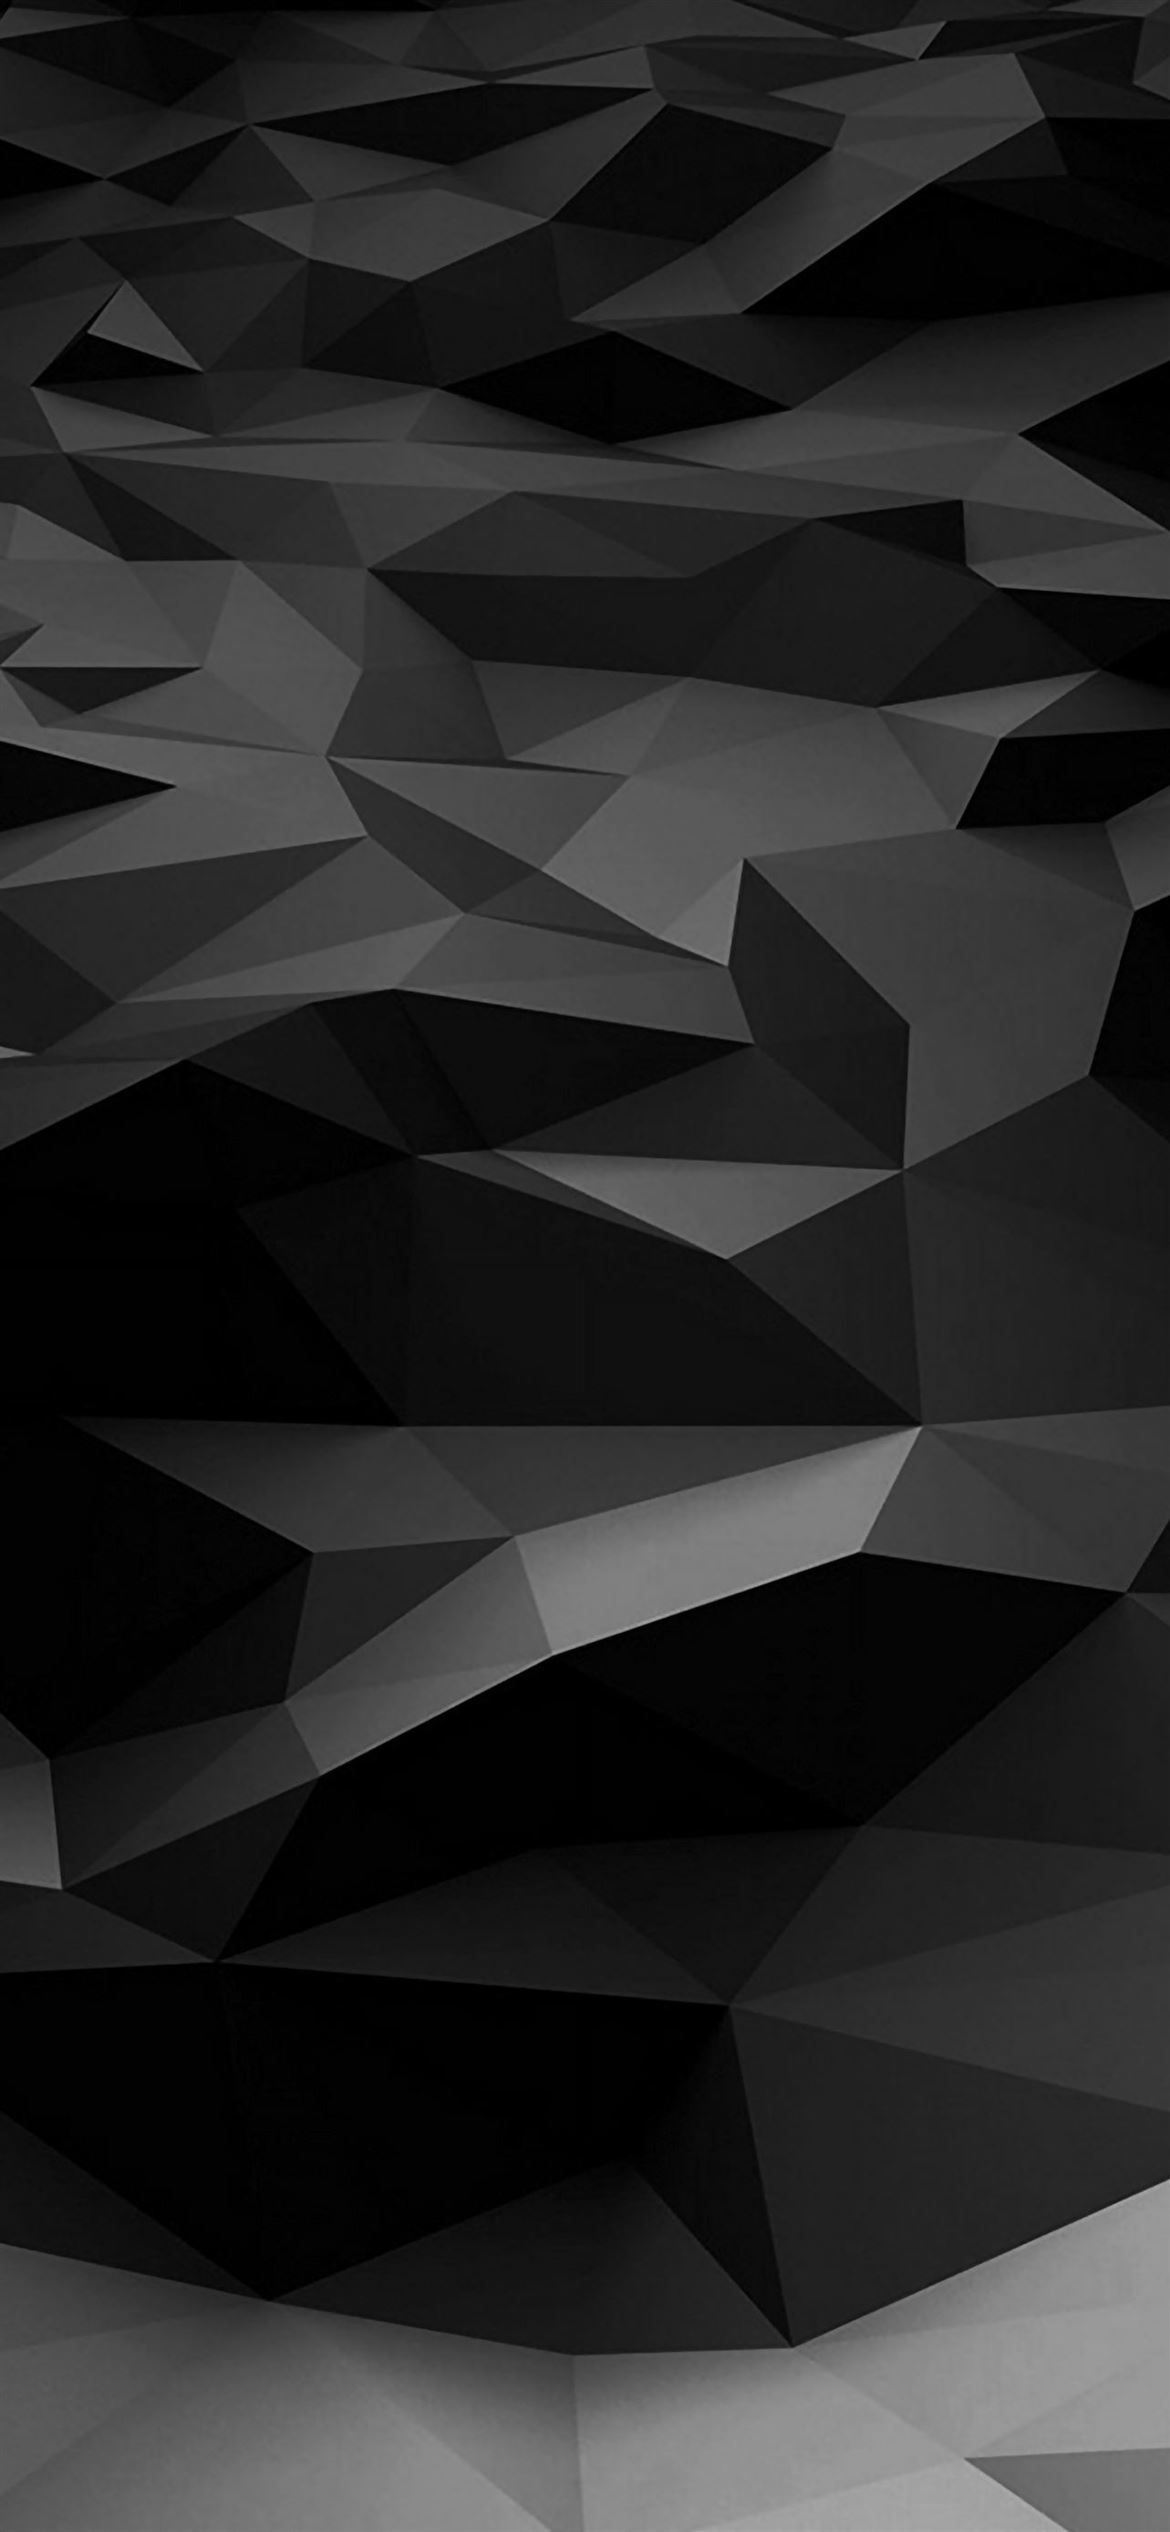 Black and white triangular shapes on a dark background - Low poly